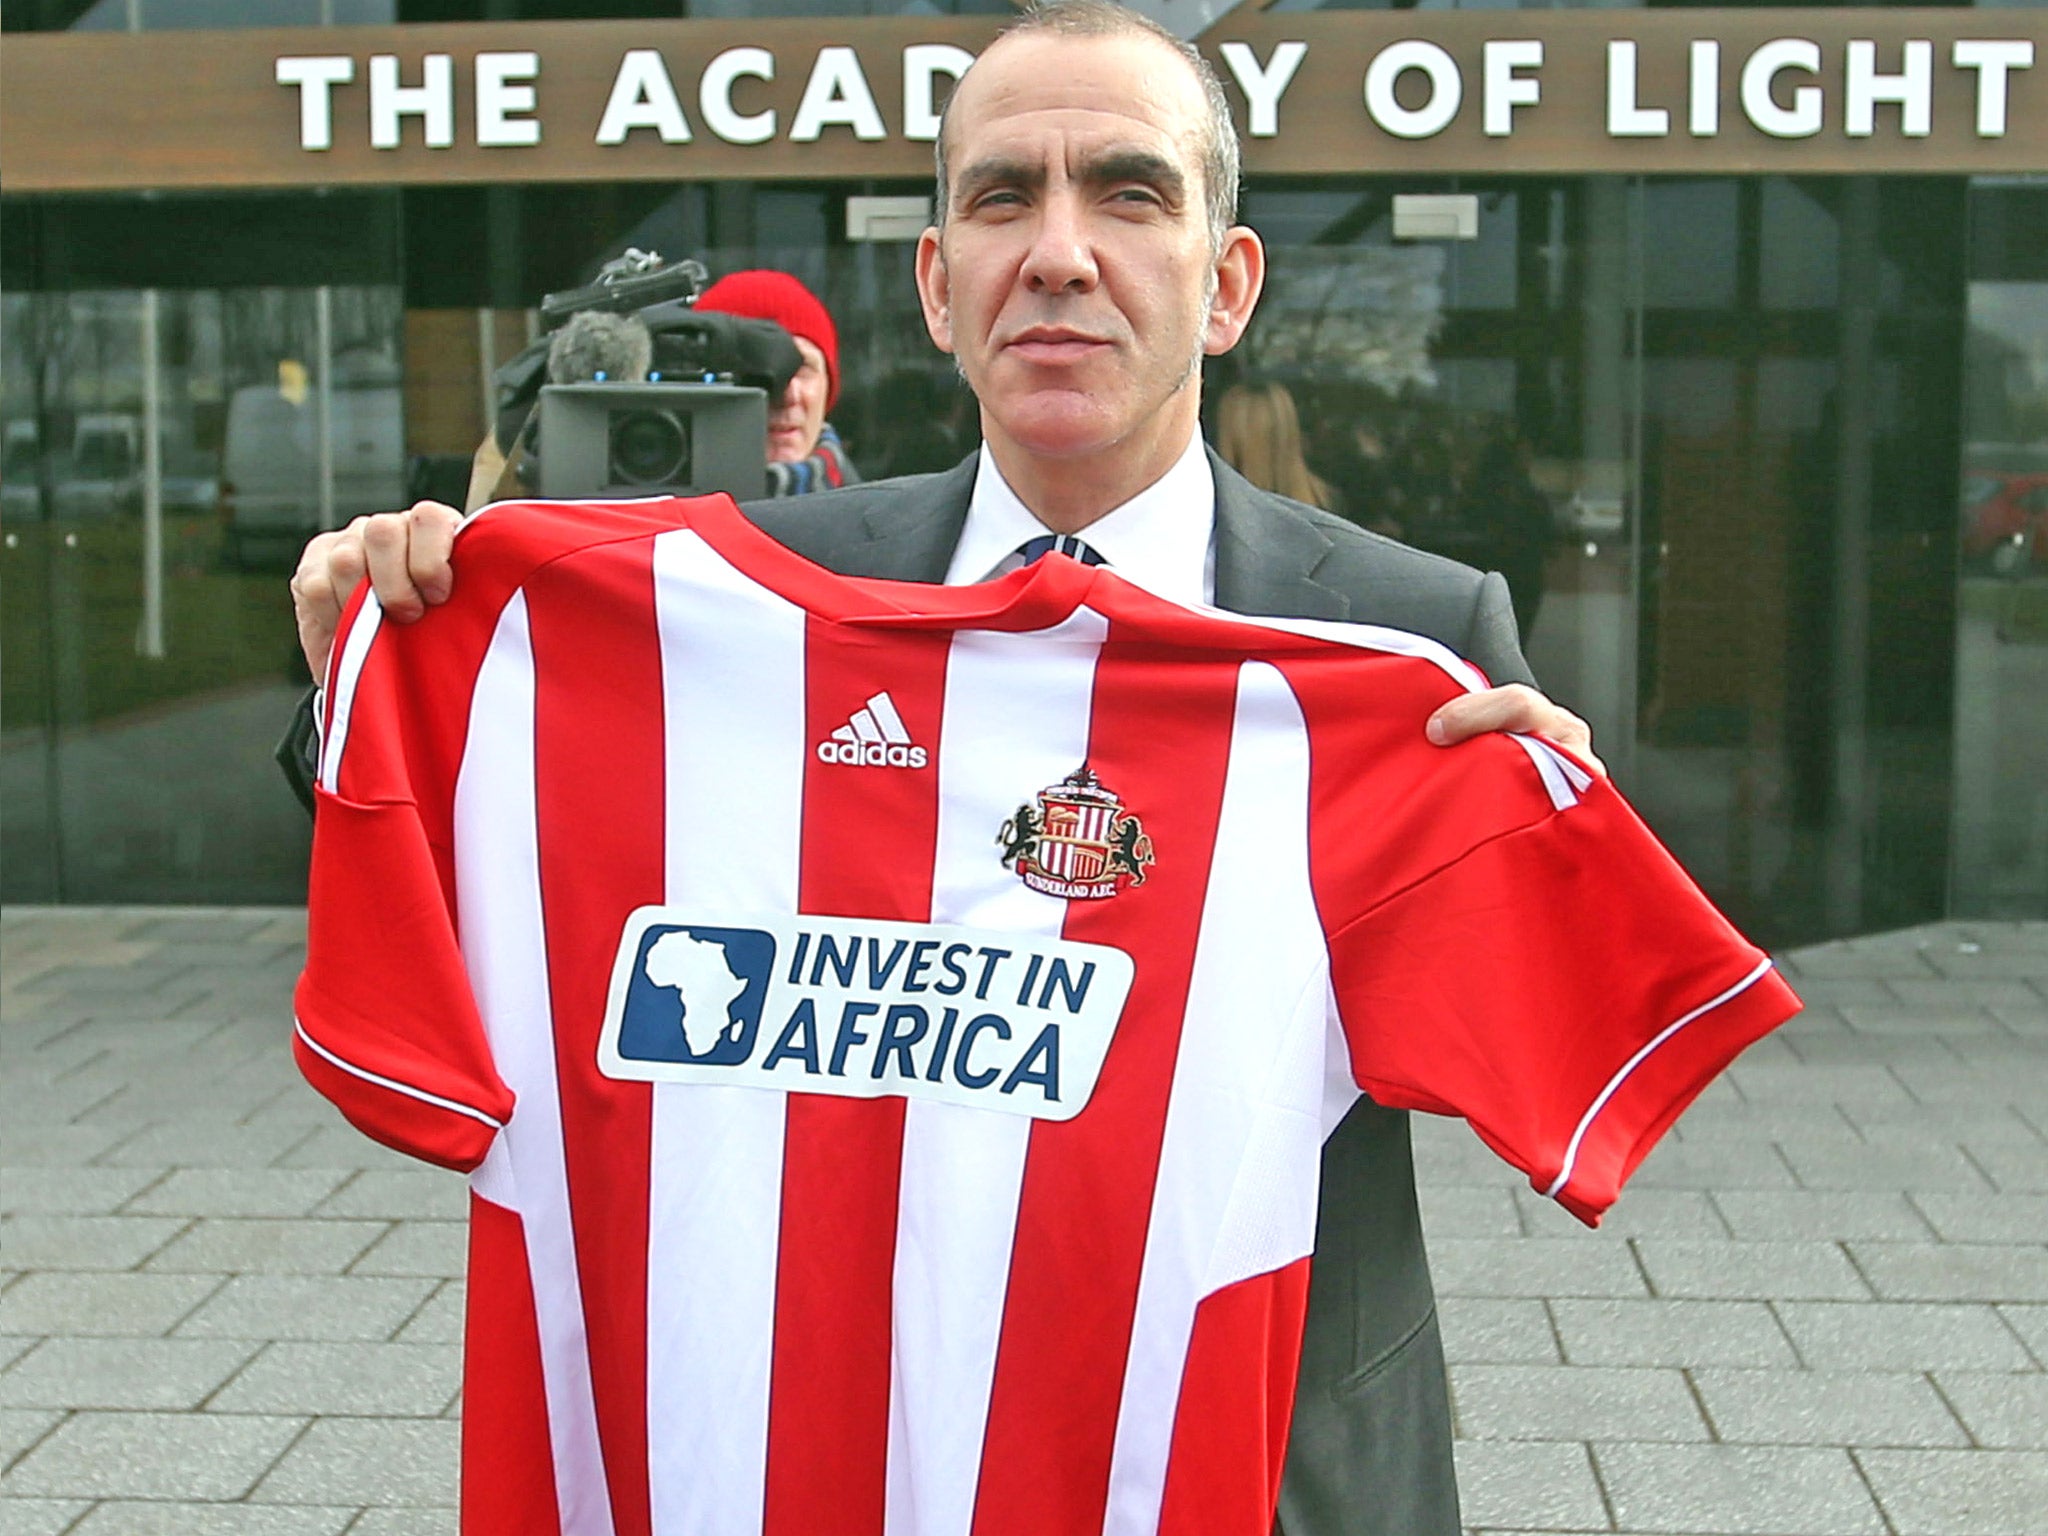 Paolo Di Canio poses with a club shirt after being unveiled as the new Sunderland manager